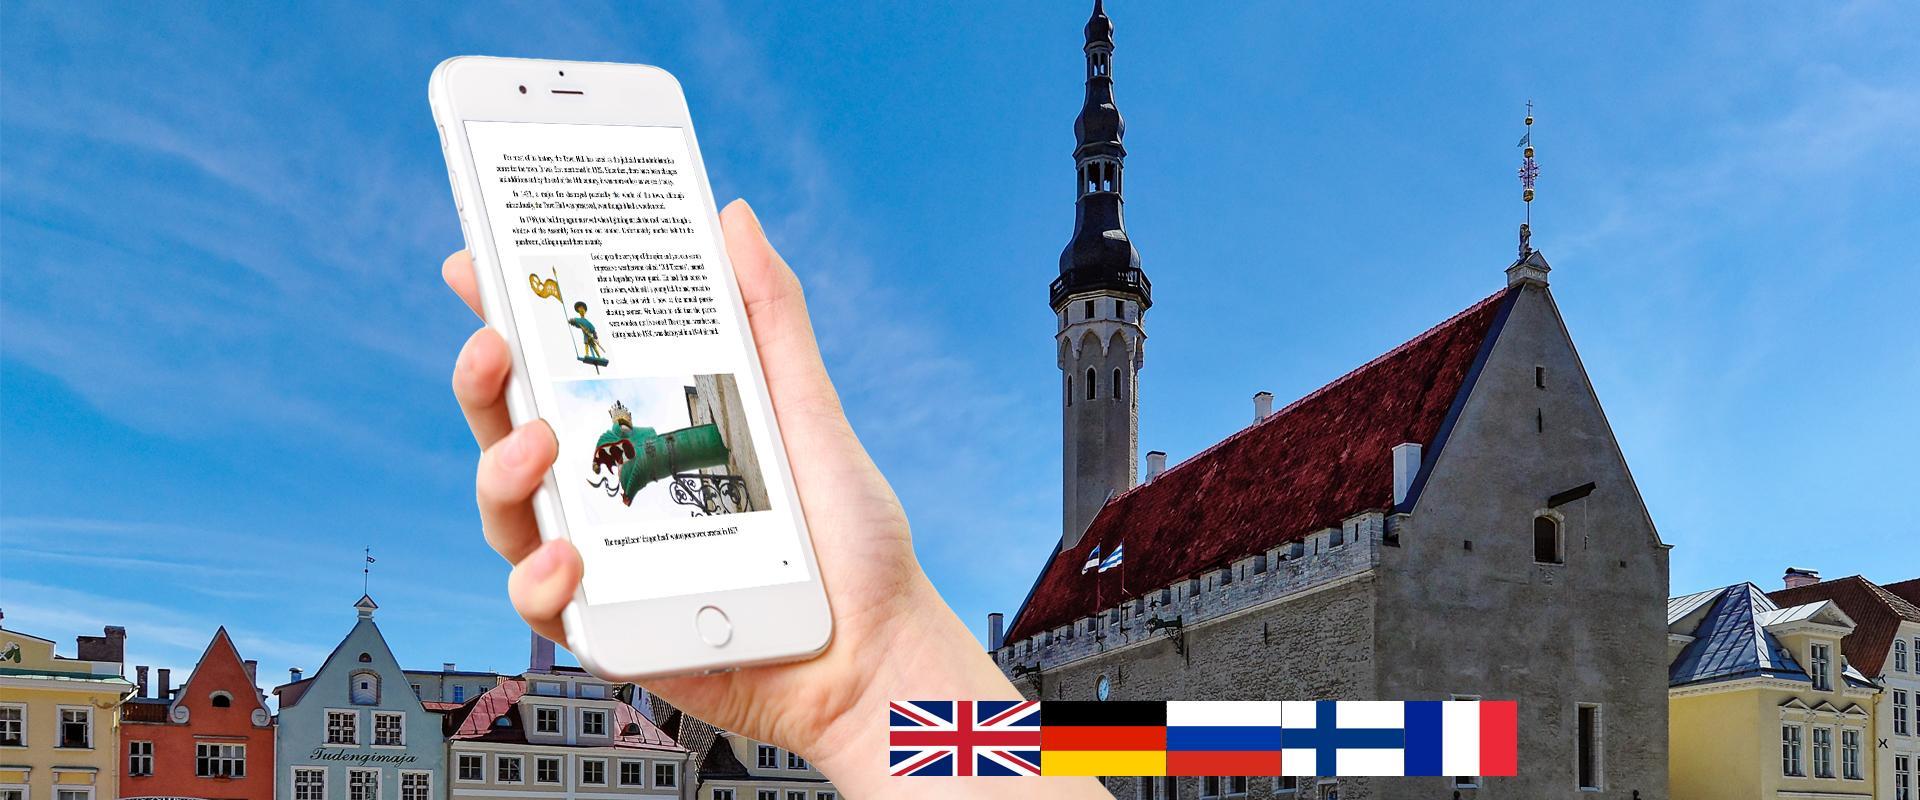 An e-book tour of Tallinn's Old Town – for downloading to your smartphone or tablet